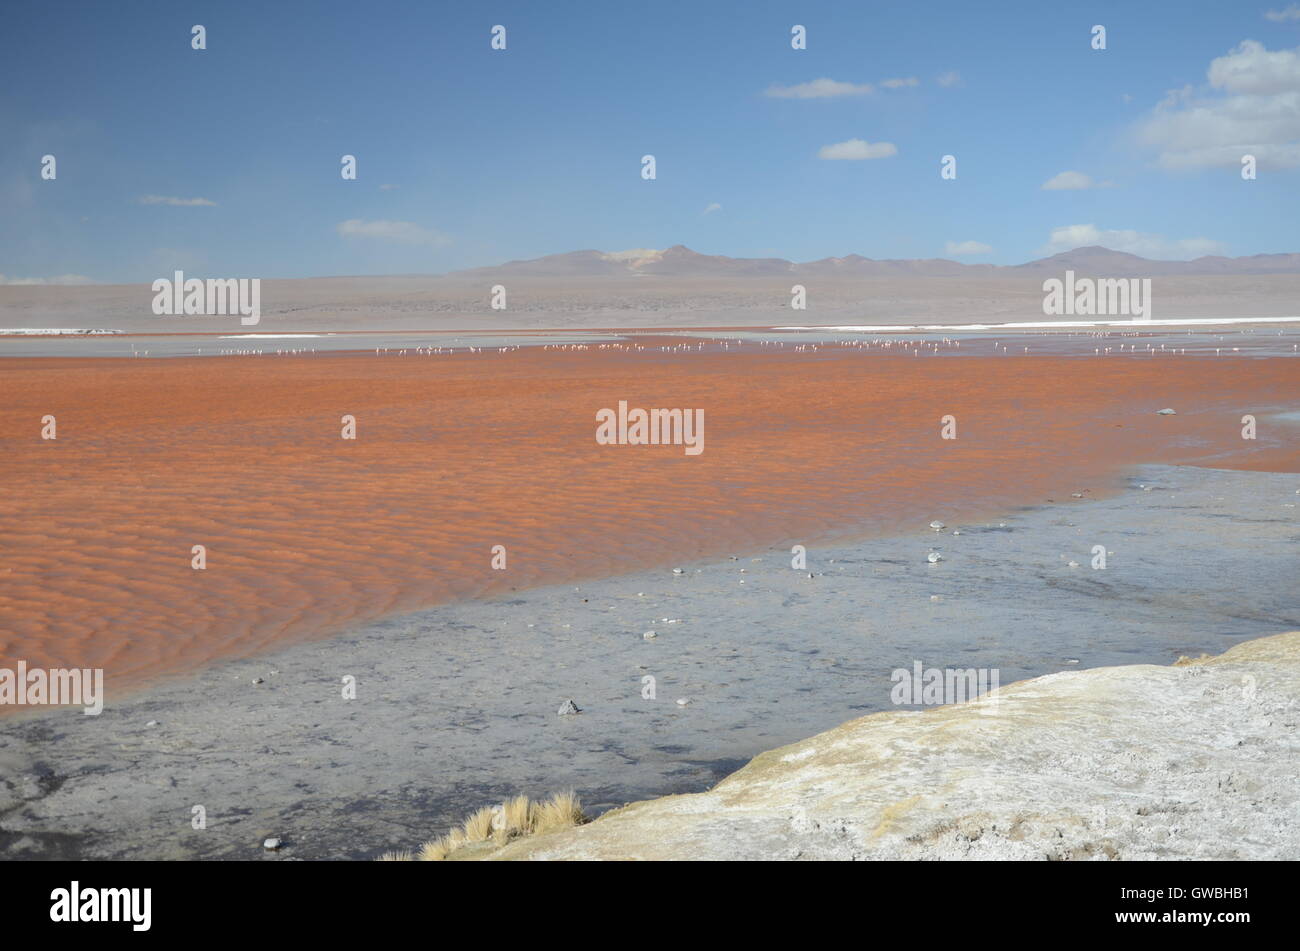 View of Lagoon with flamingos and mountains in the background Stock Photo